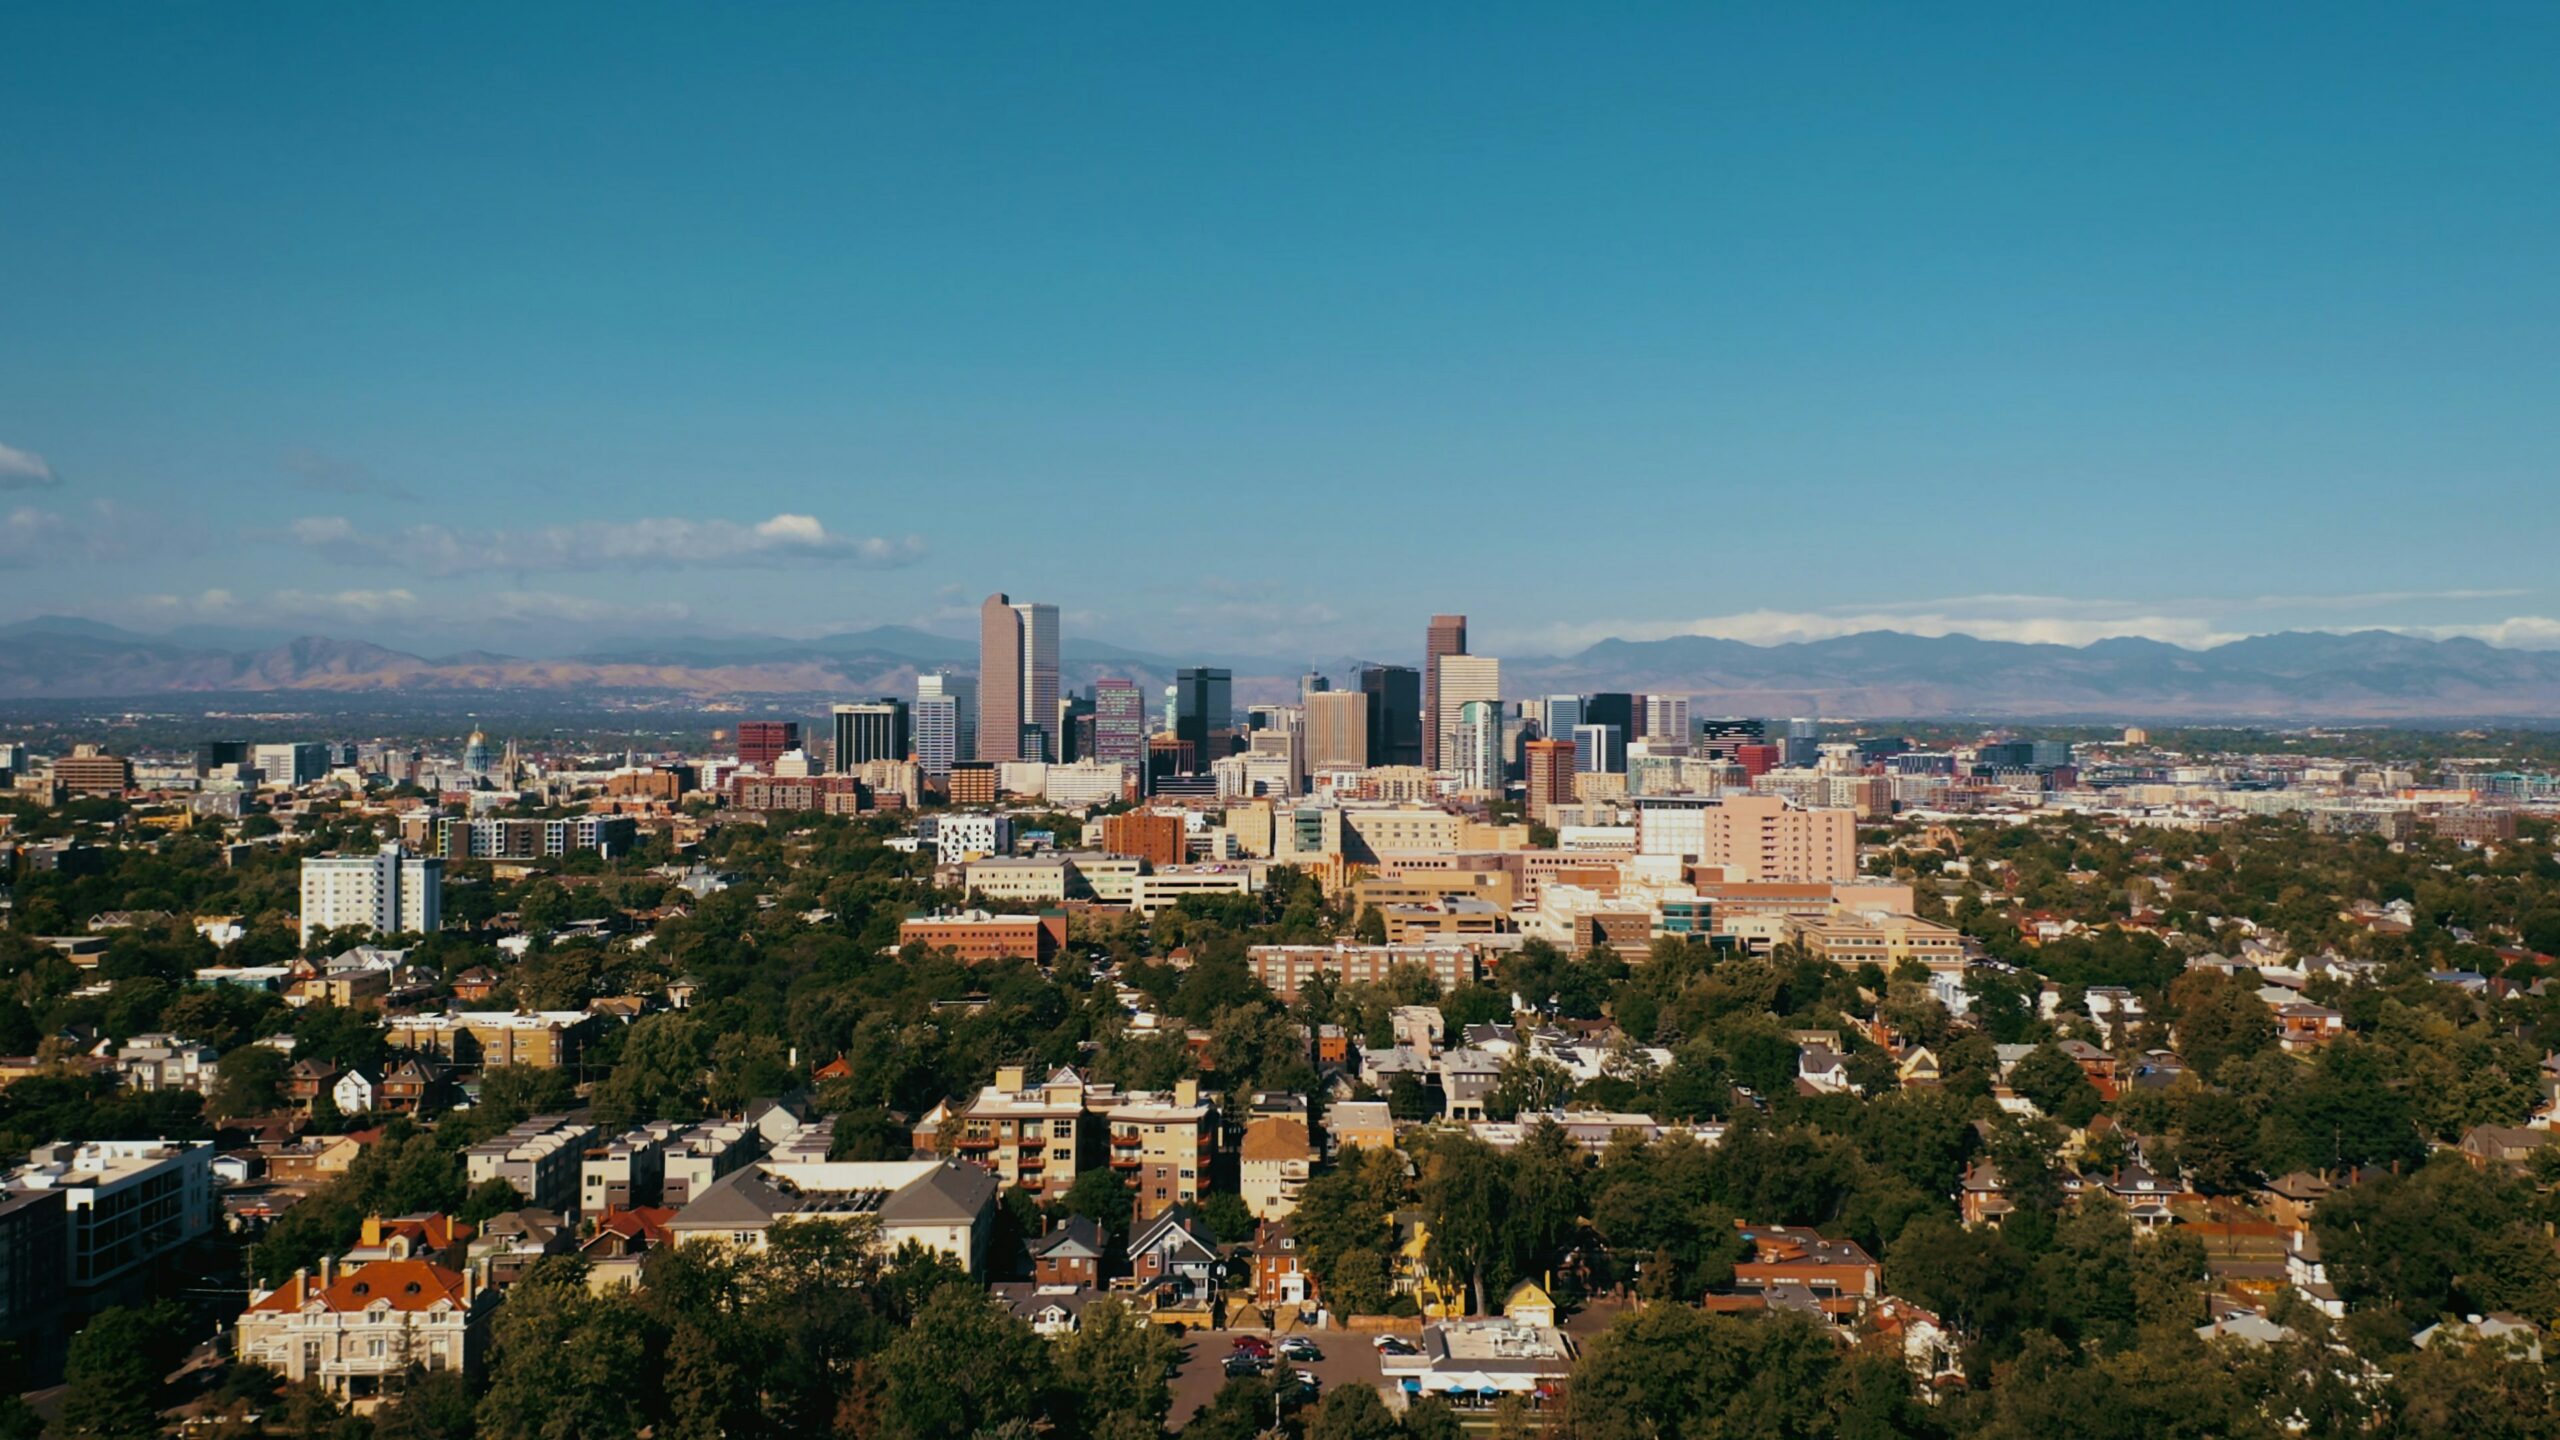 Harnessing Solar Energy: A Step Towards Sustainability and Savings for Colorado’s Income-Qualified Communities